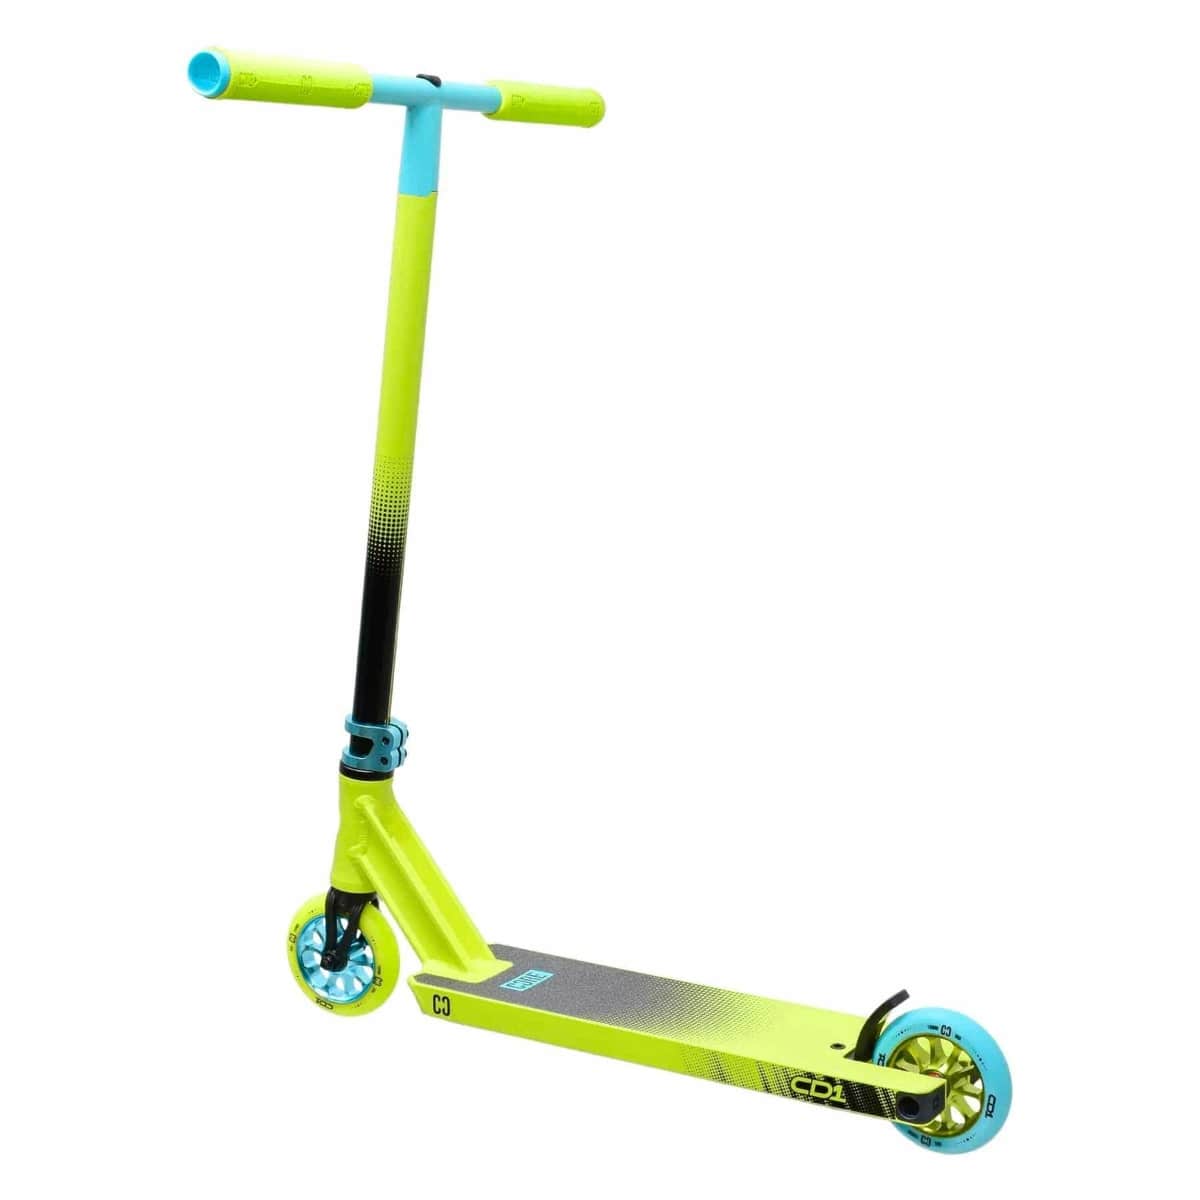 CORE CD1 Complete Stunt Scooter - Lime / Teal - Angle